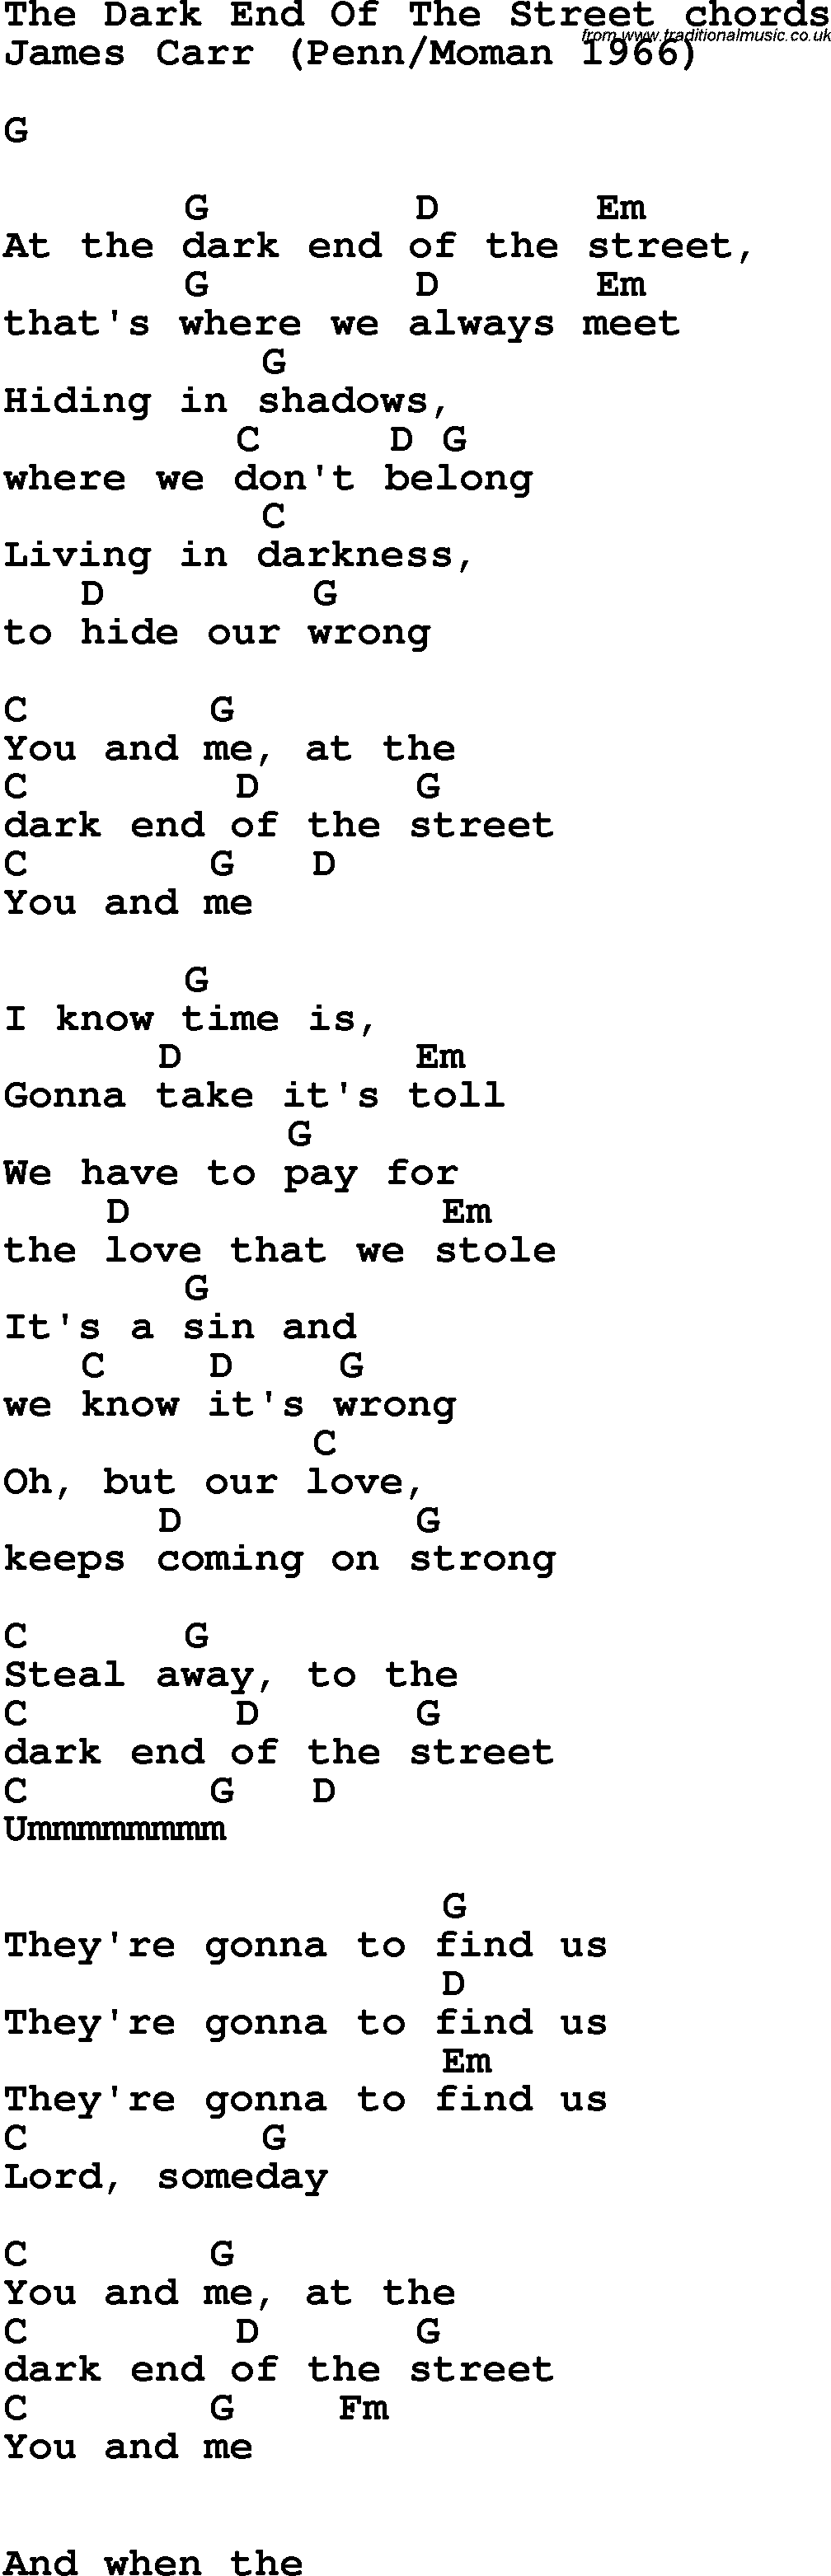 Song Lyrics with guitar chords for The Dark End Of The Street